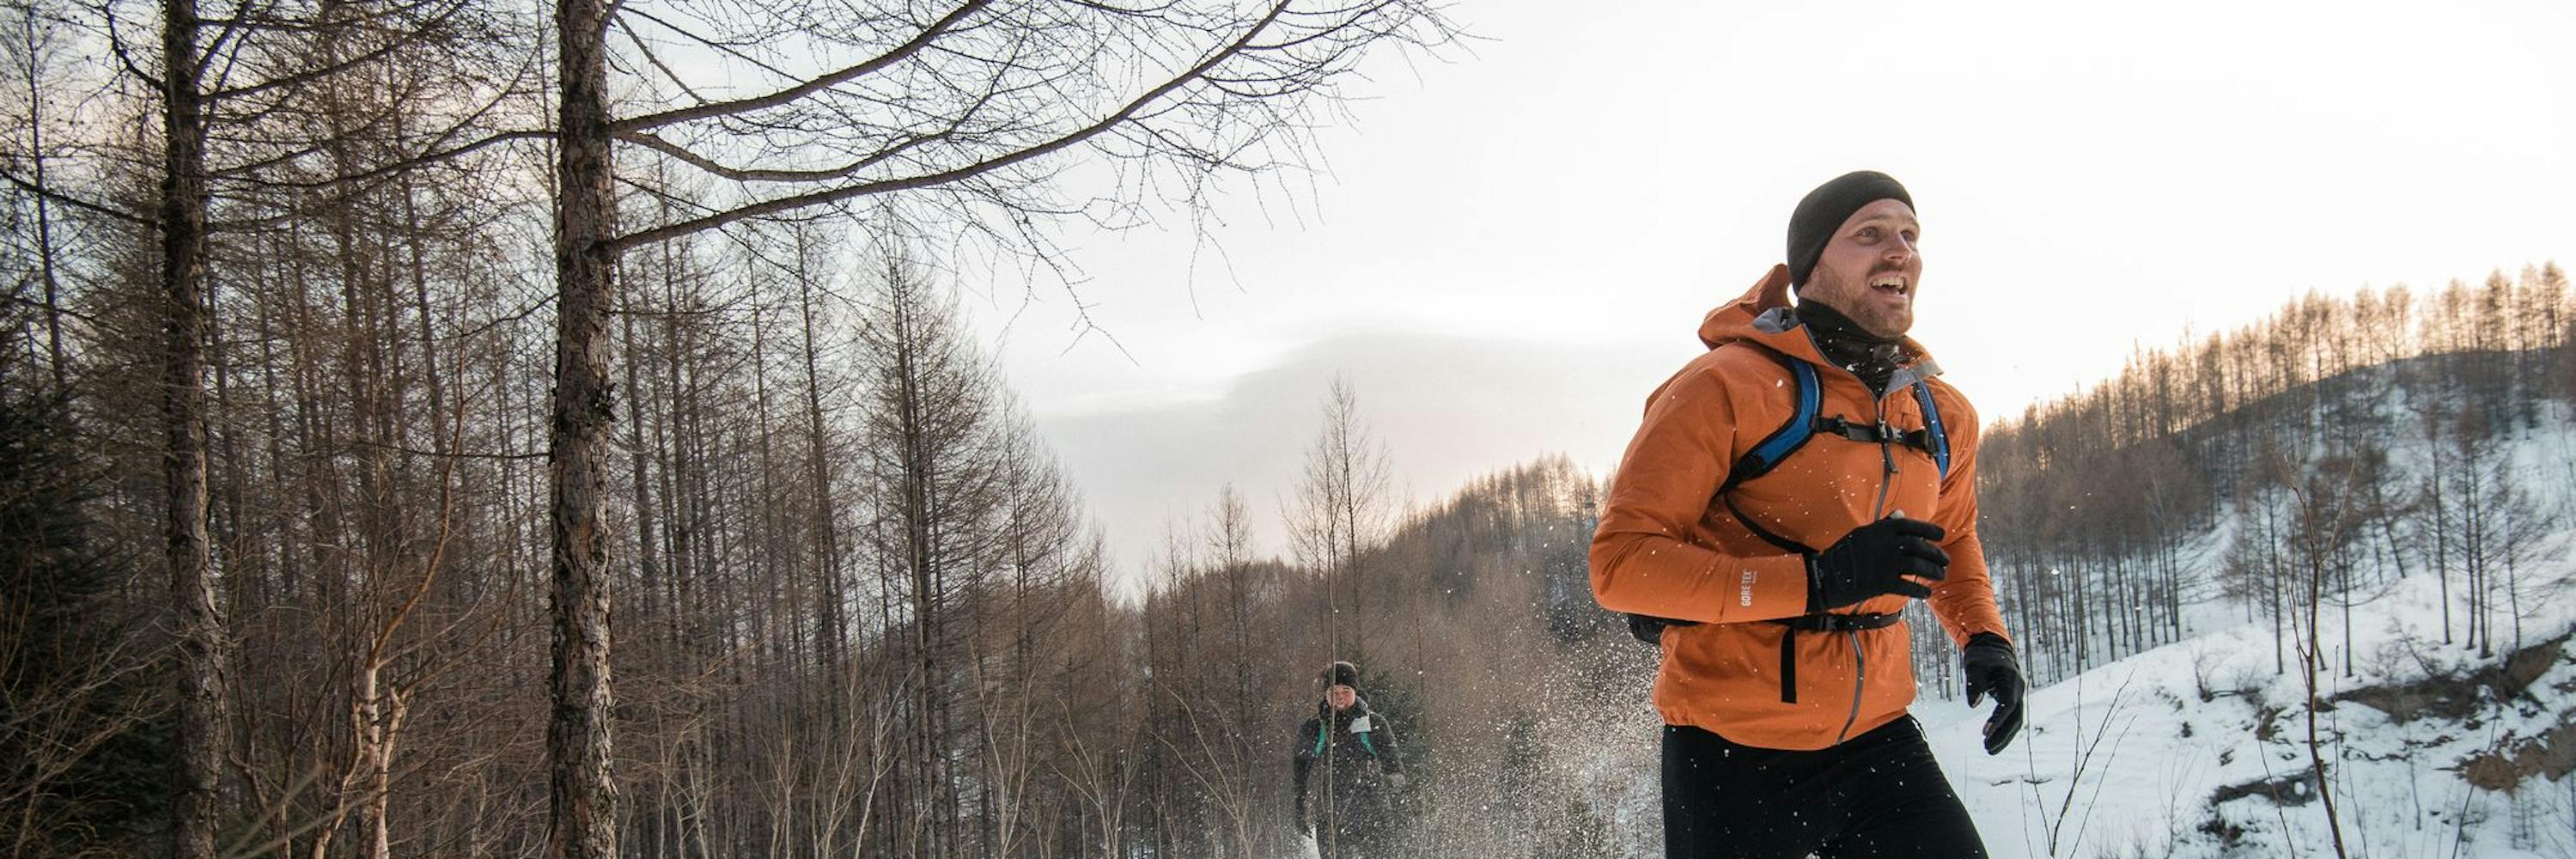 7 Keys for How to Run in The Snow and Ice (From a CO Runner)